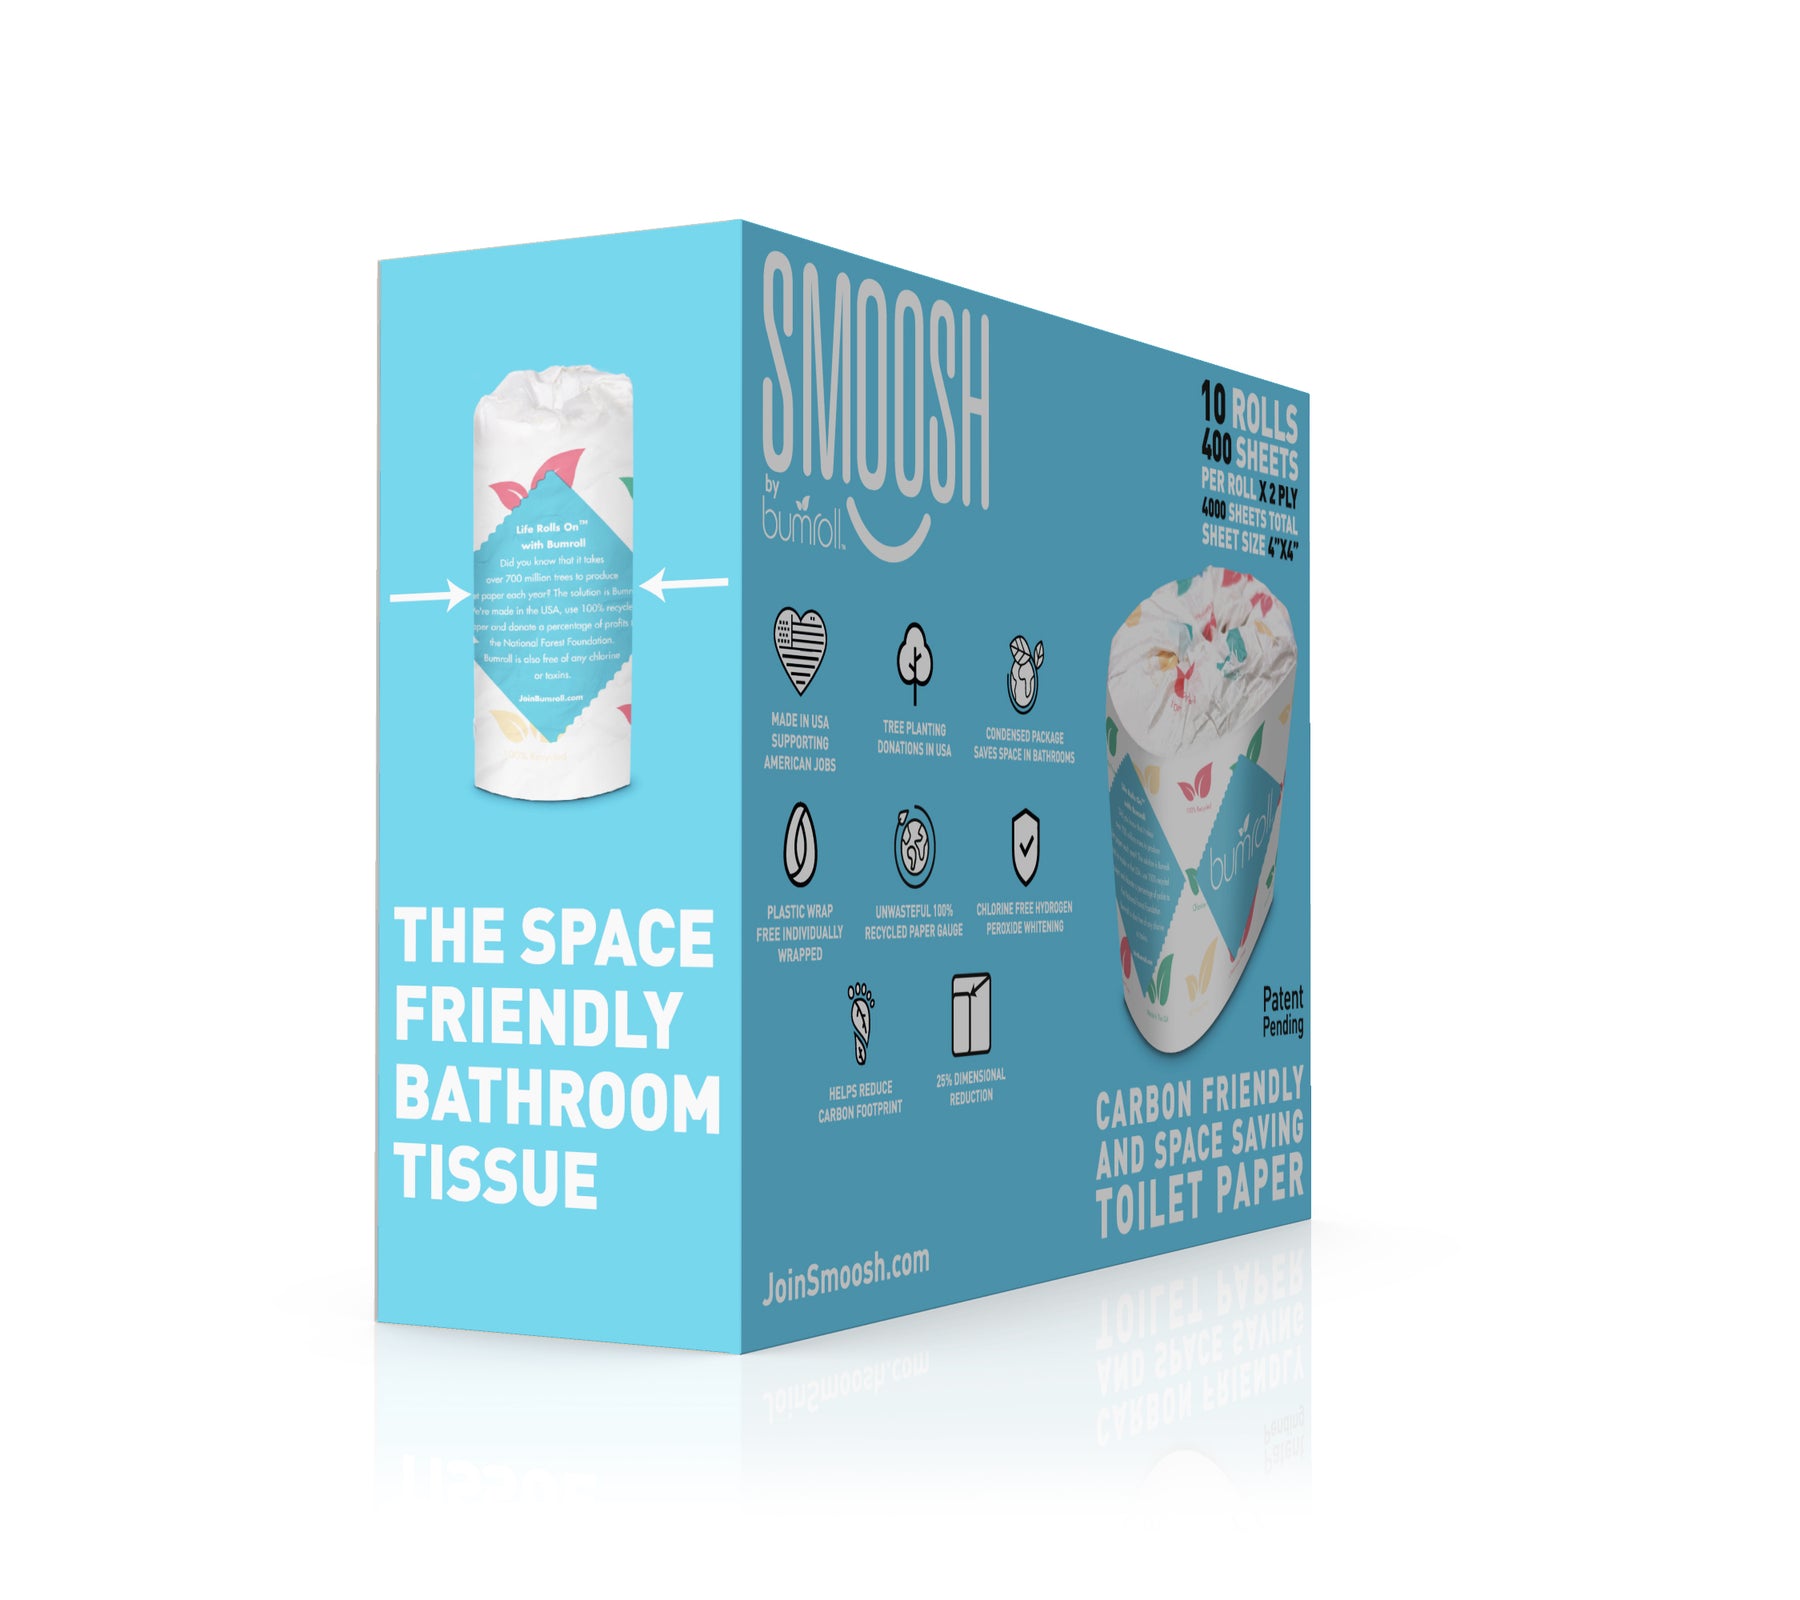 Bumroll is Earth Friendly Premium Toilet Paper – Join Bumroll